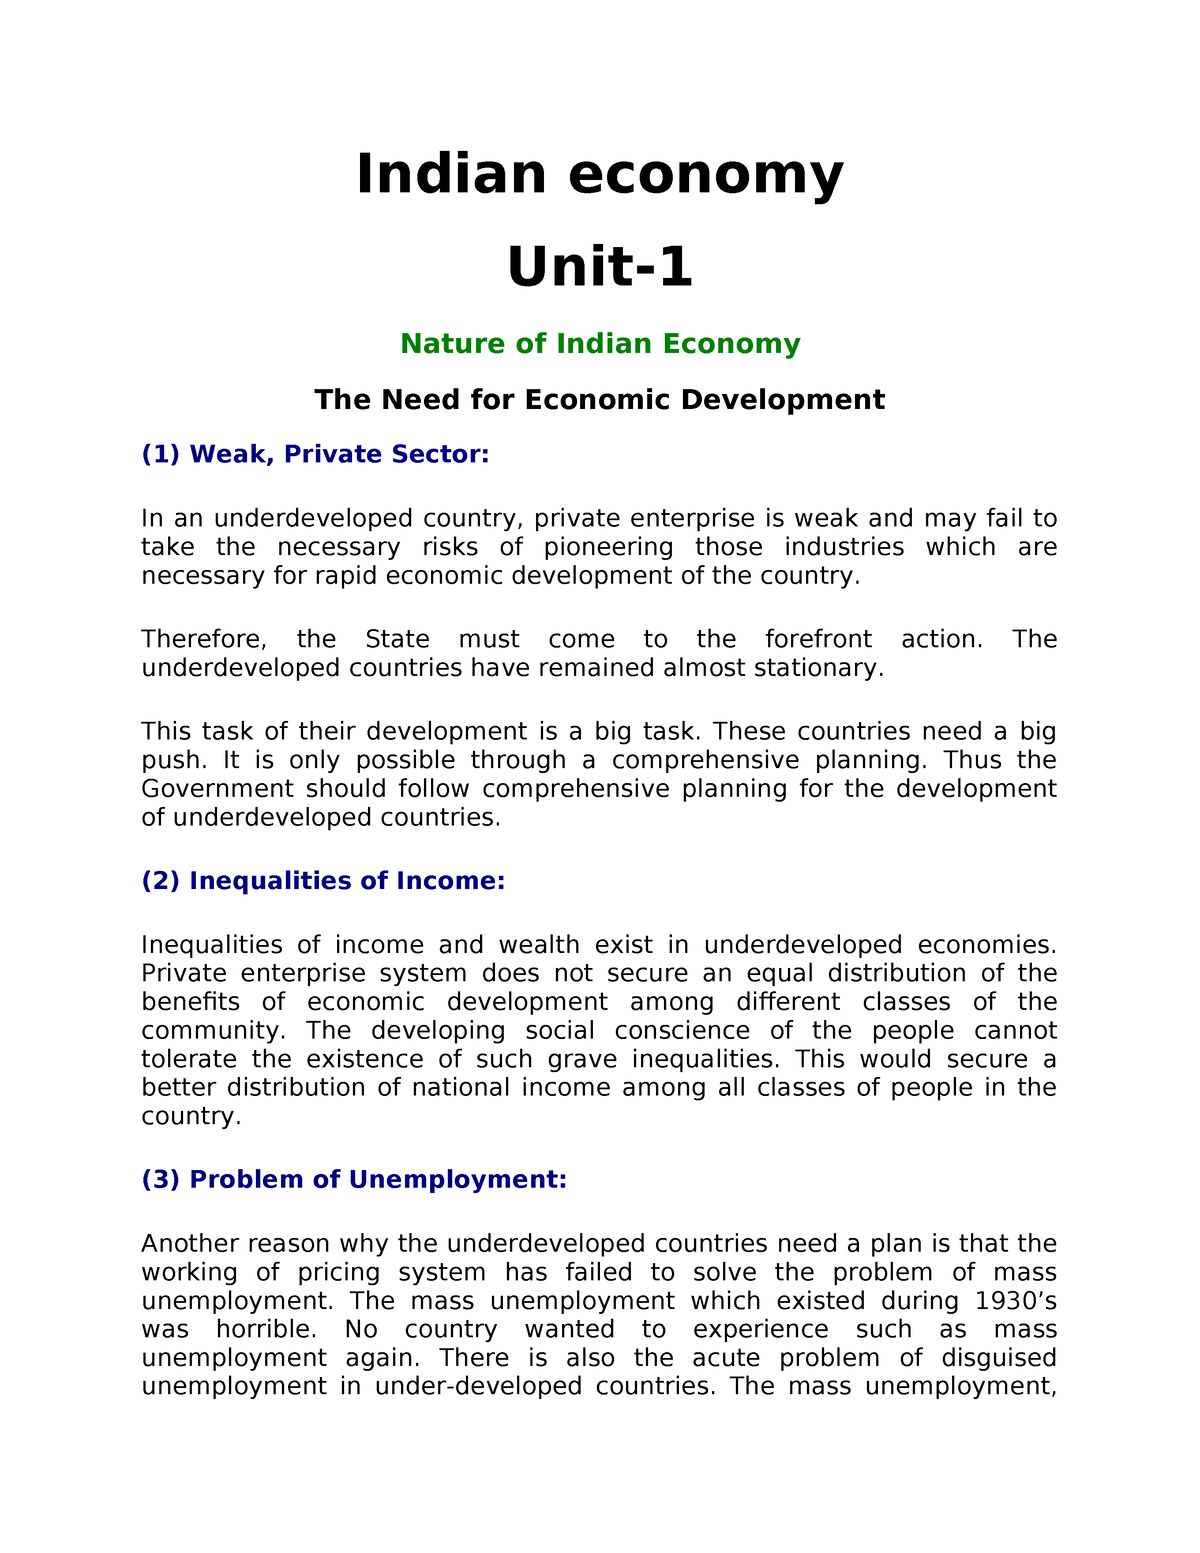 research paper topics on indian economy